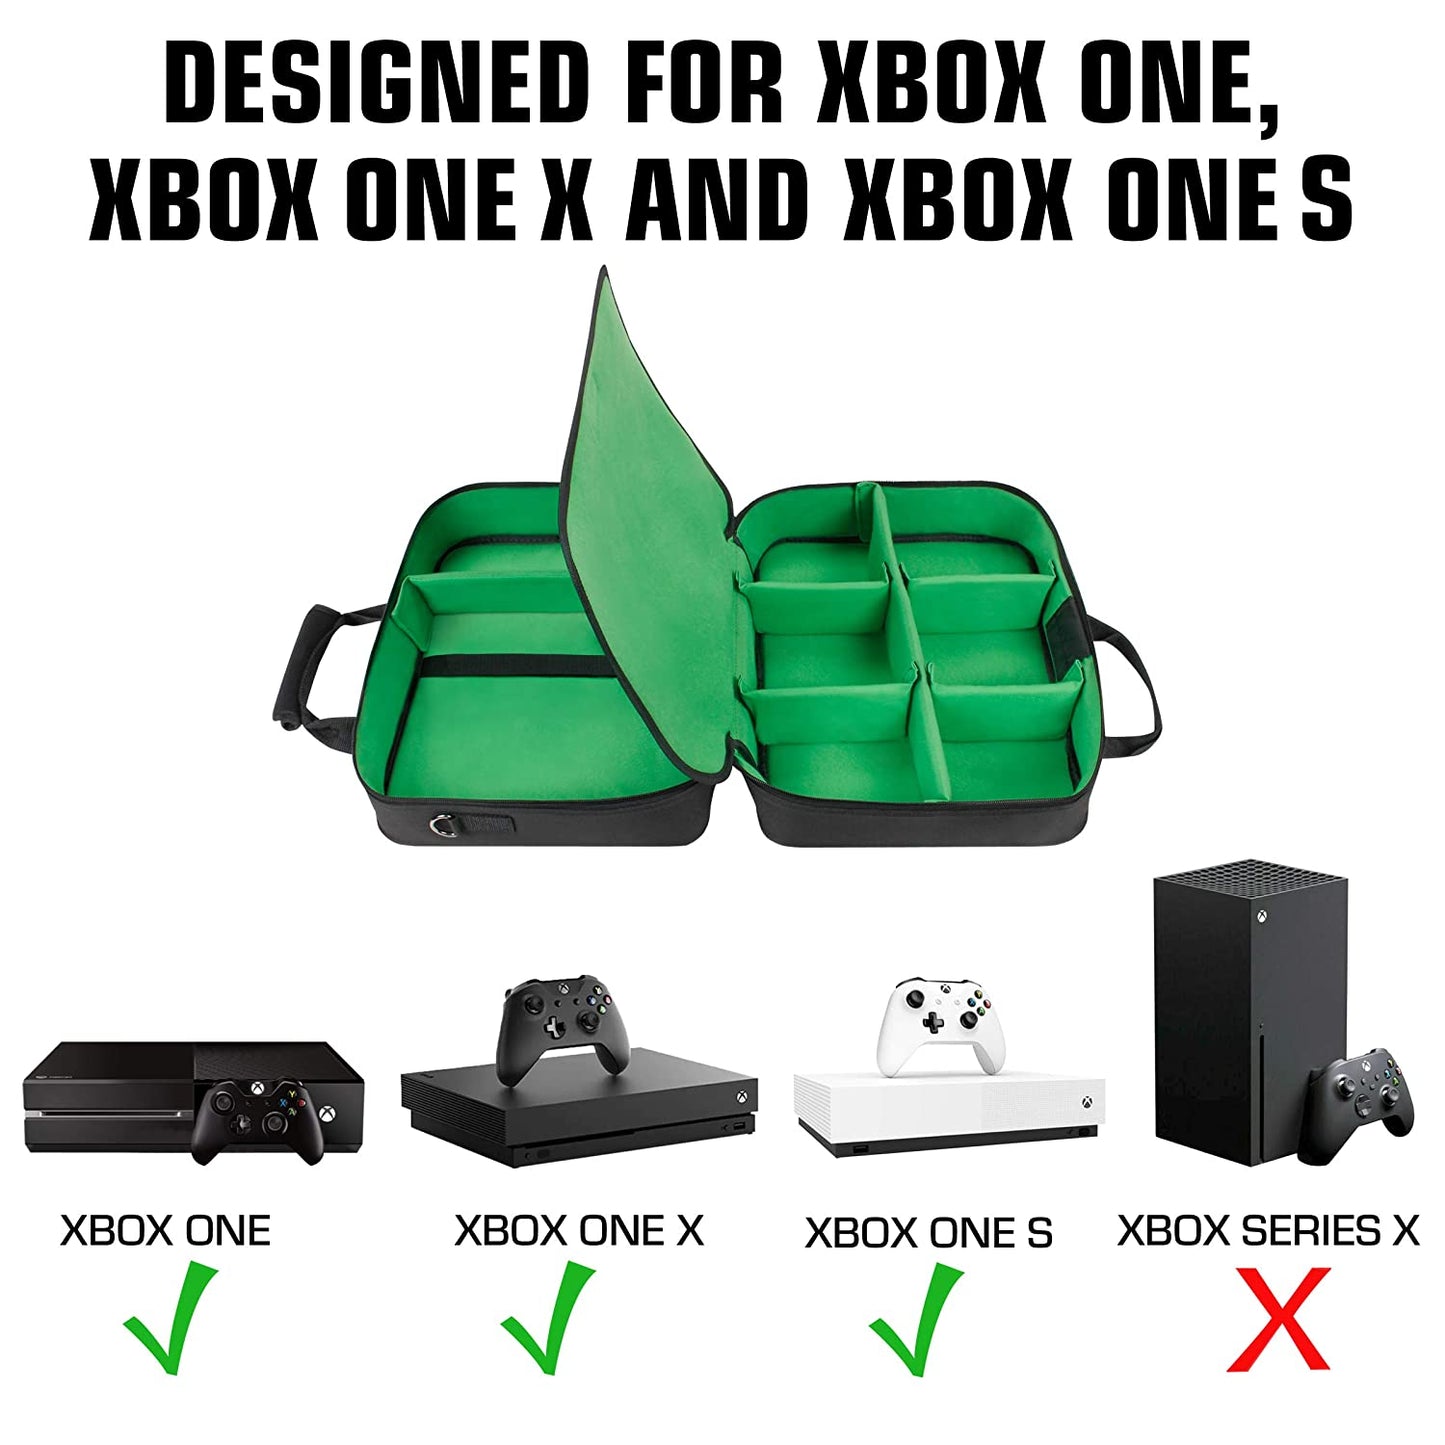 Console Carrying Case, Travel Bag for Xbox One and Xbox 360, Water Resistant Exterior, Dedicated Storage for Controllers, Cables, and Gaming Headsets